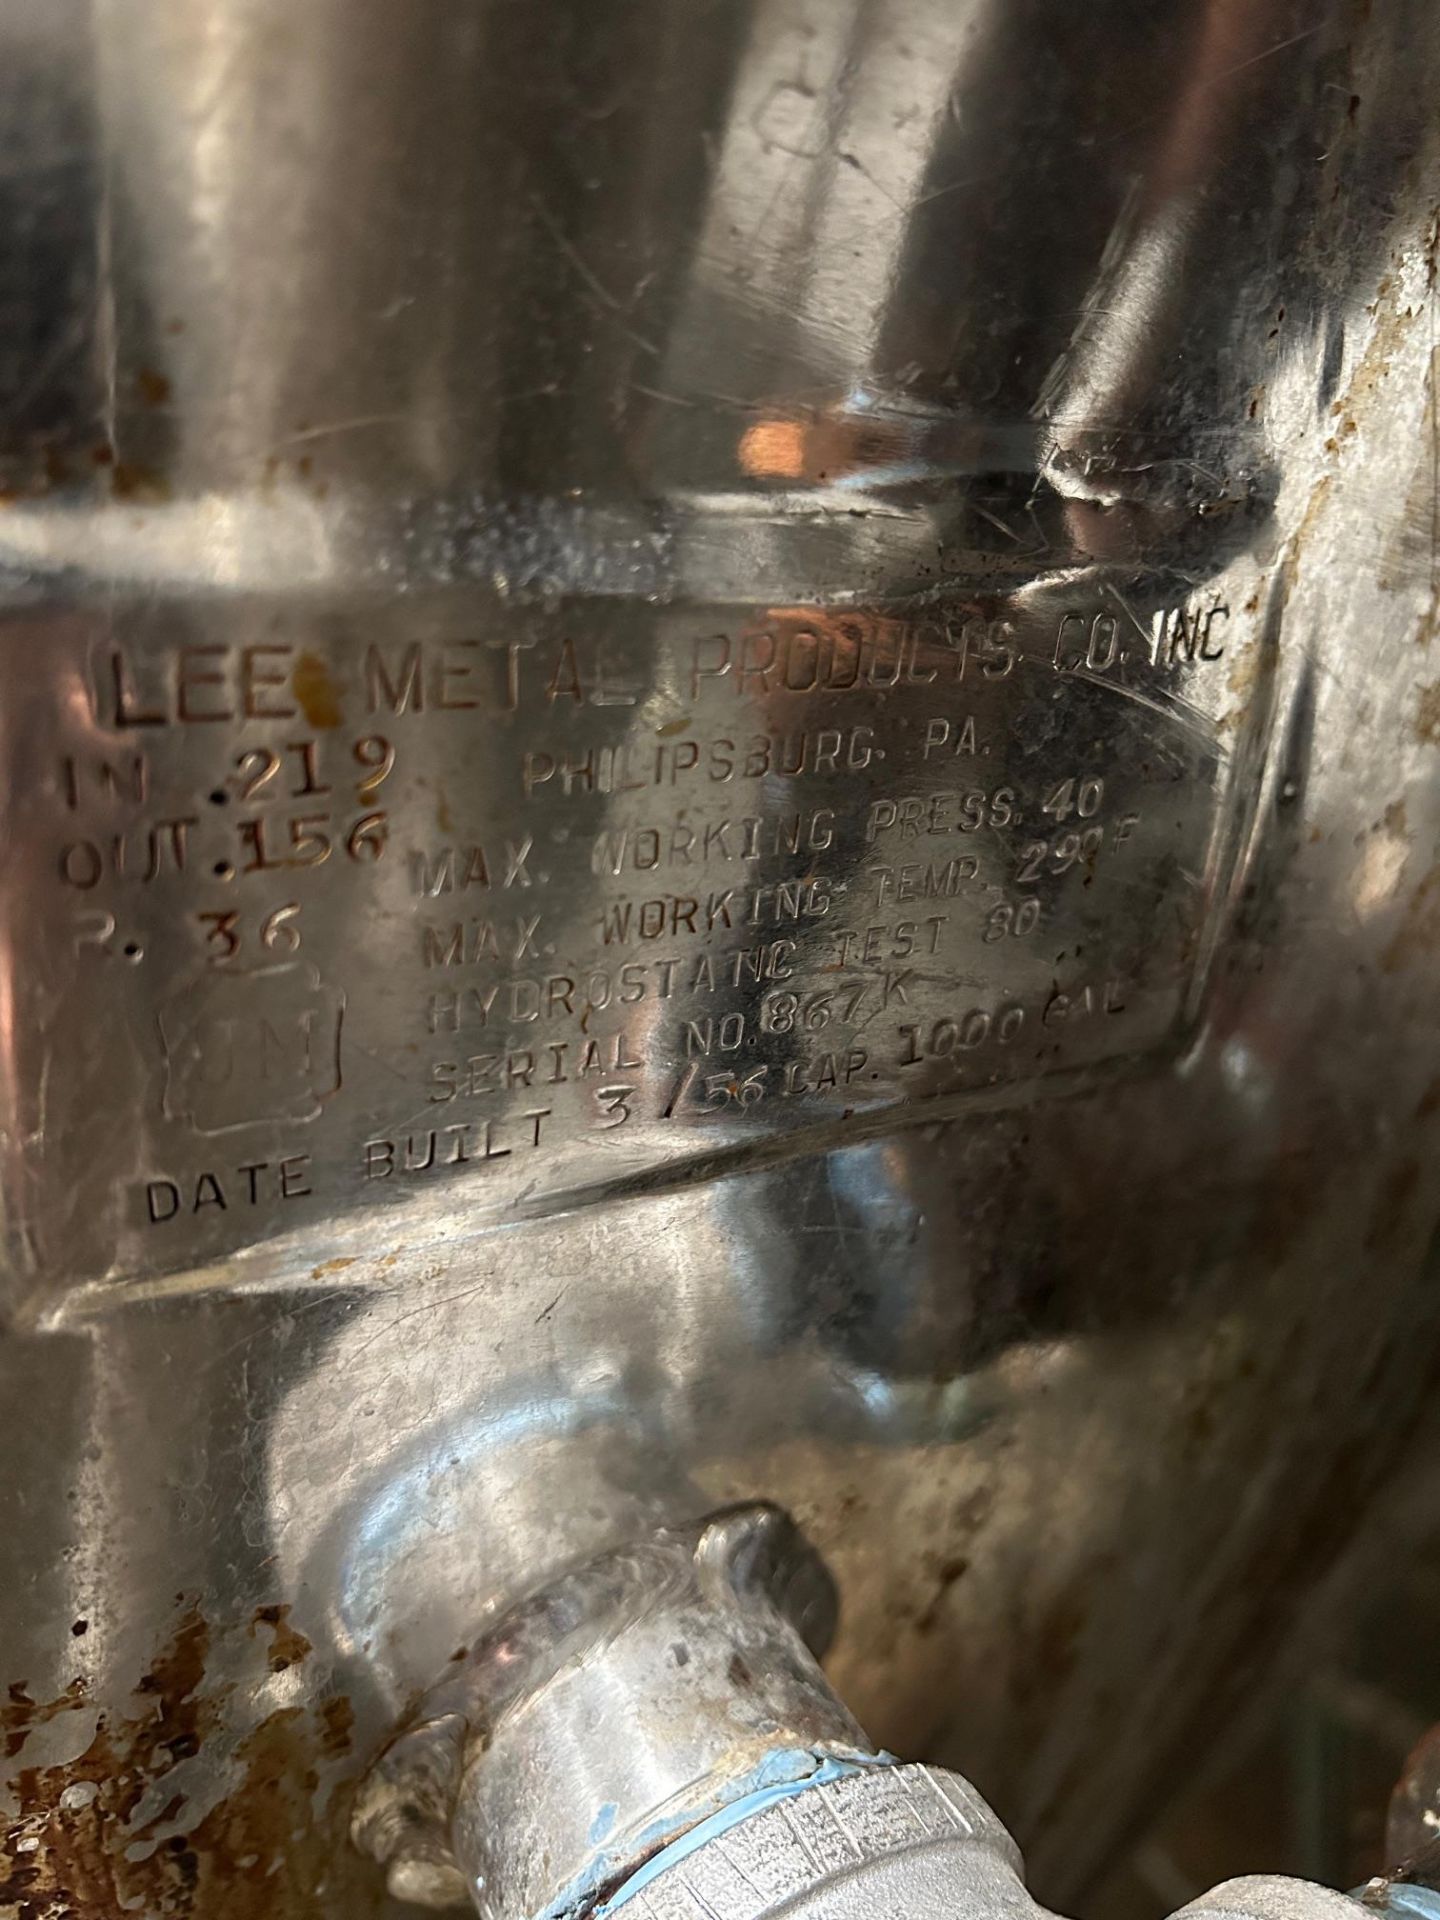 Lee Metal Products 1000-Gallon Stainless Steel Jacketed Kettle - Image 7 of 7